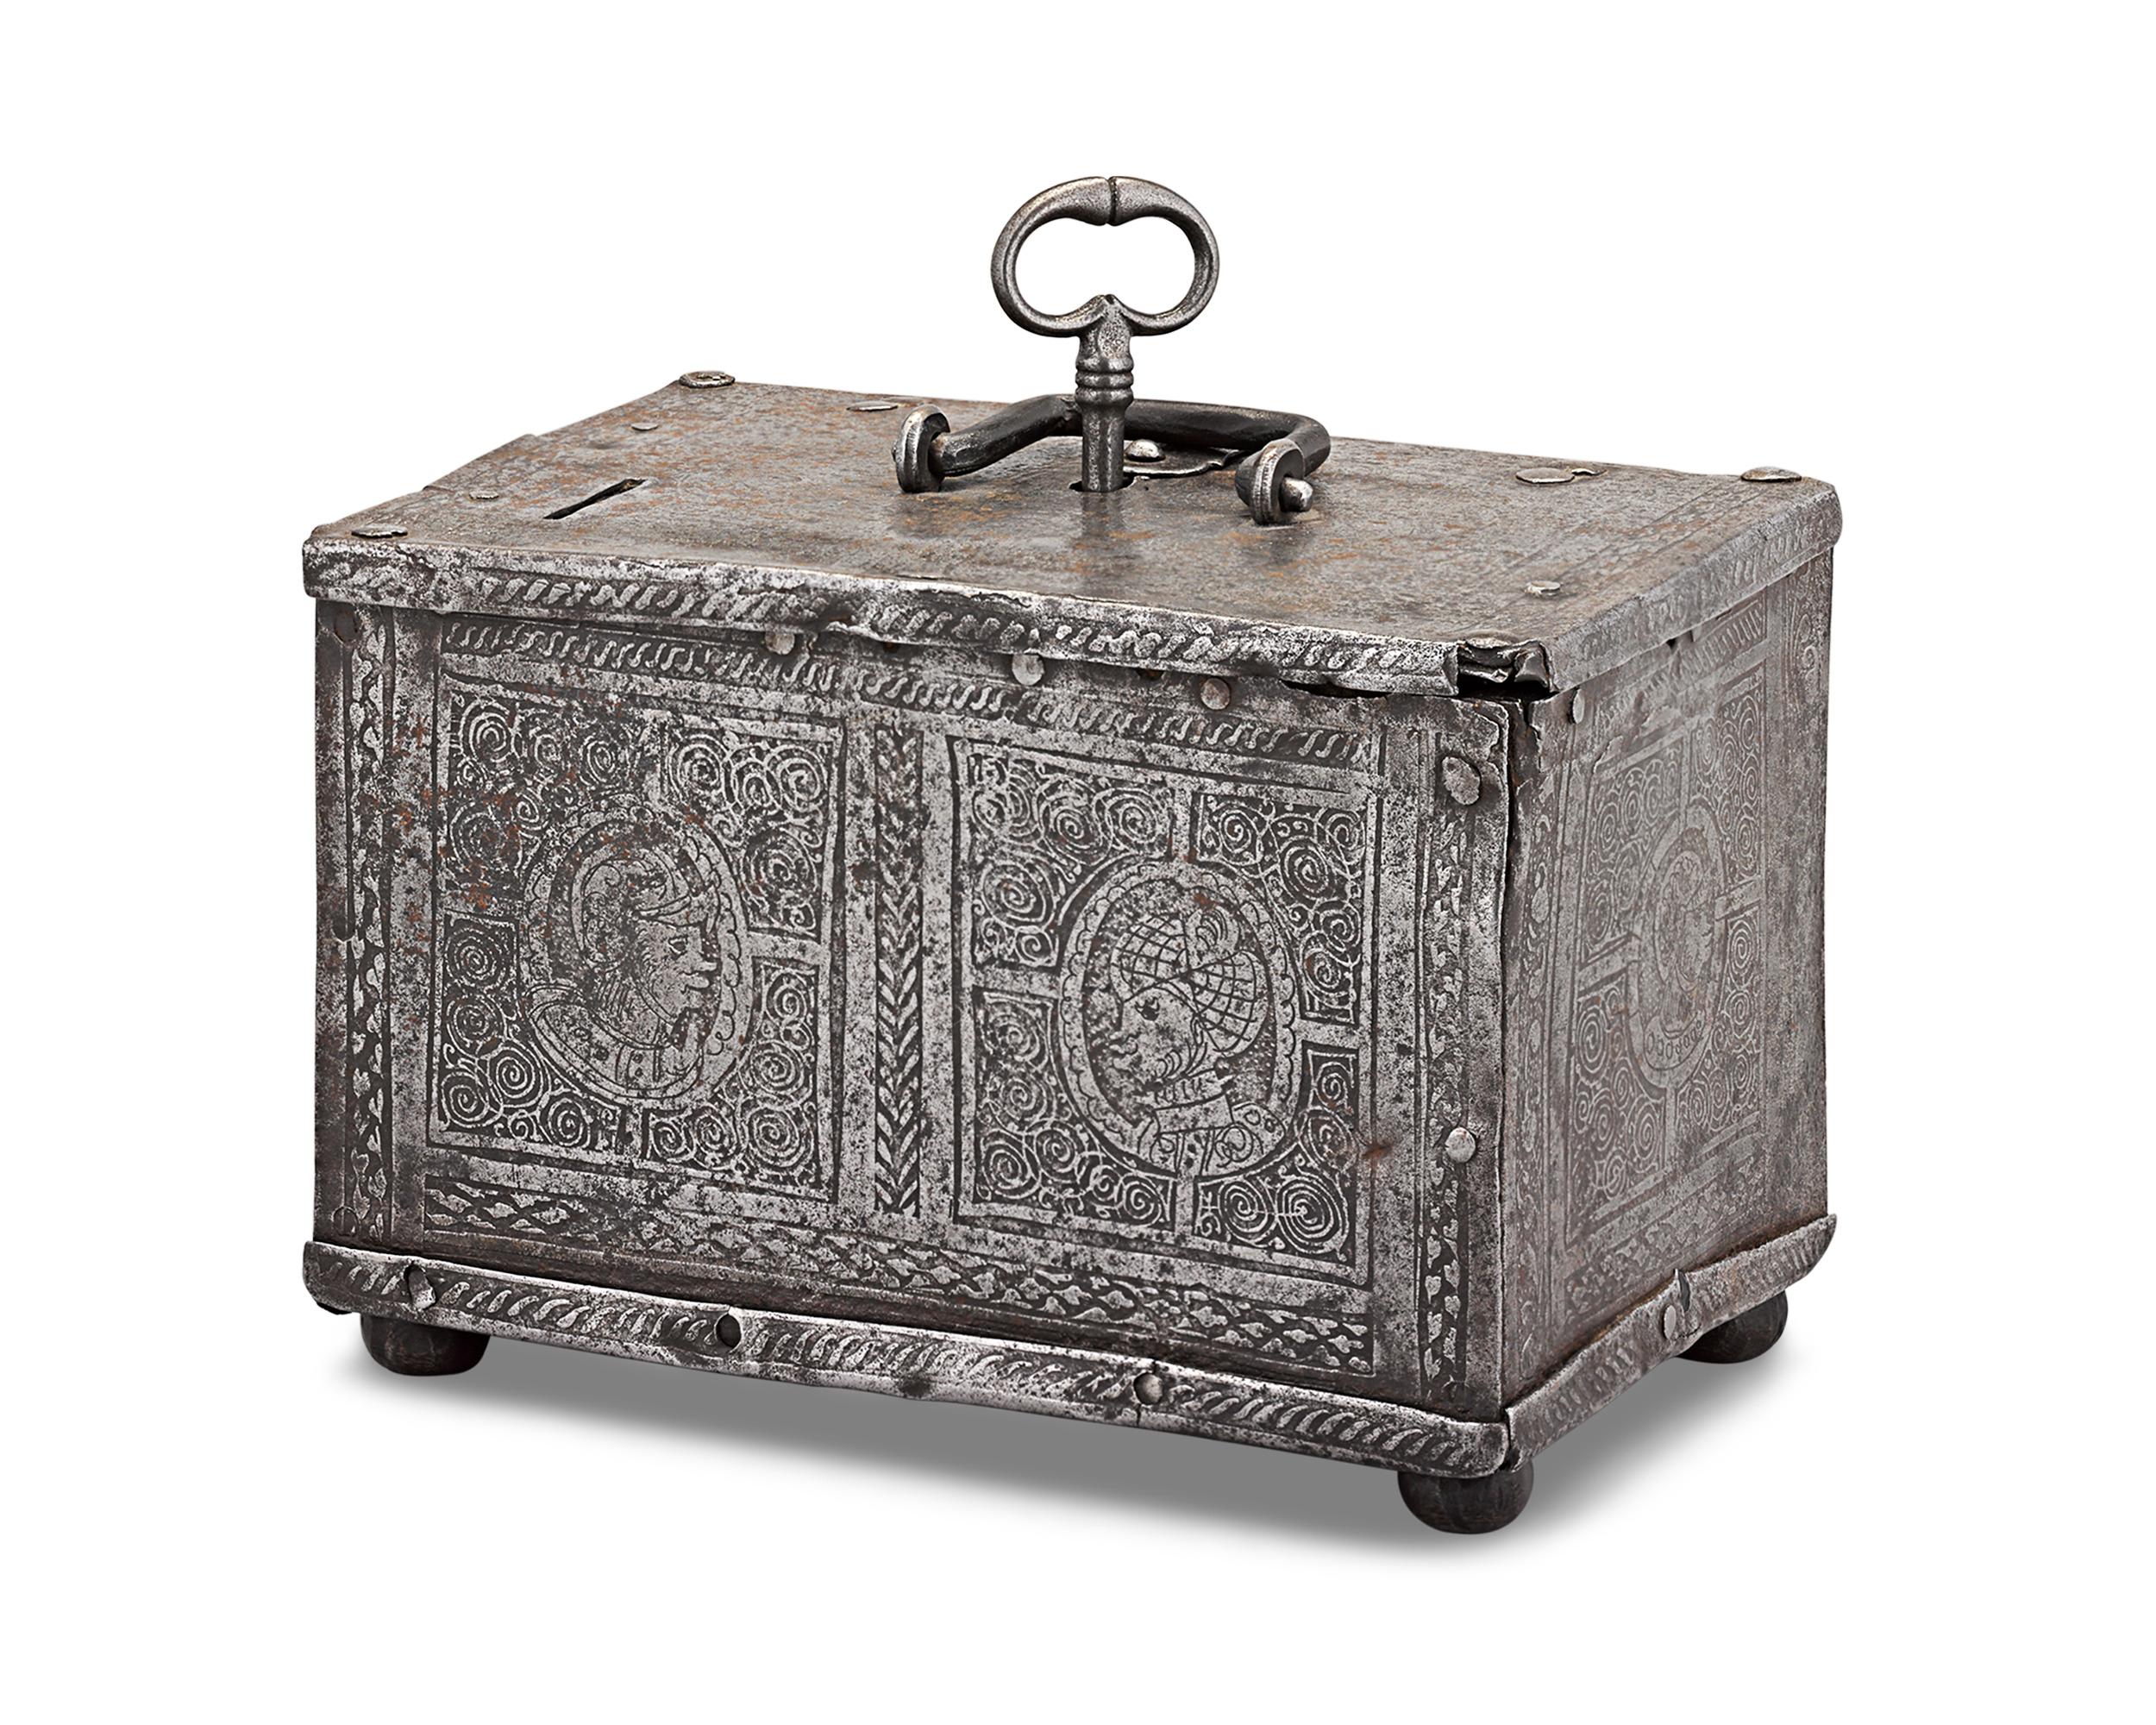 Dating to the turn of the 17th century, this incredibly rare German etched steel casket opens to reveal an elaborate locking device under its lid. Bearing the qualities of chests made in the southern German city of Nuremburg, the exterior of this